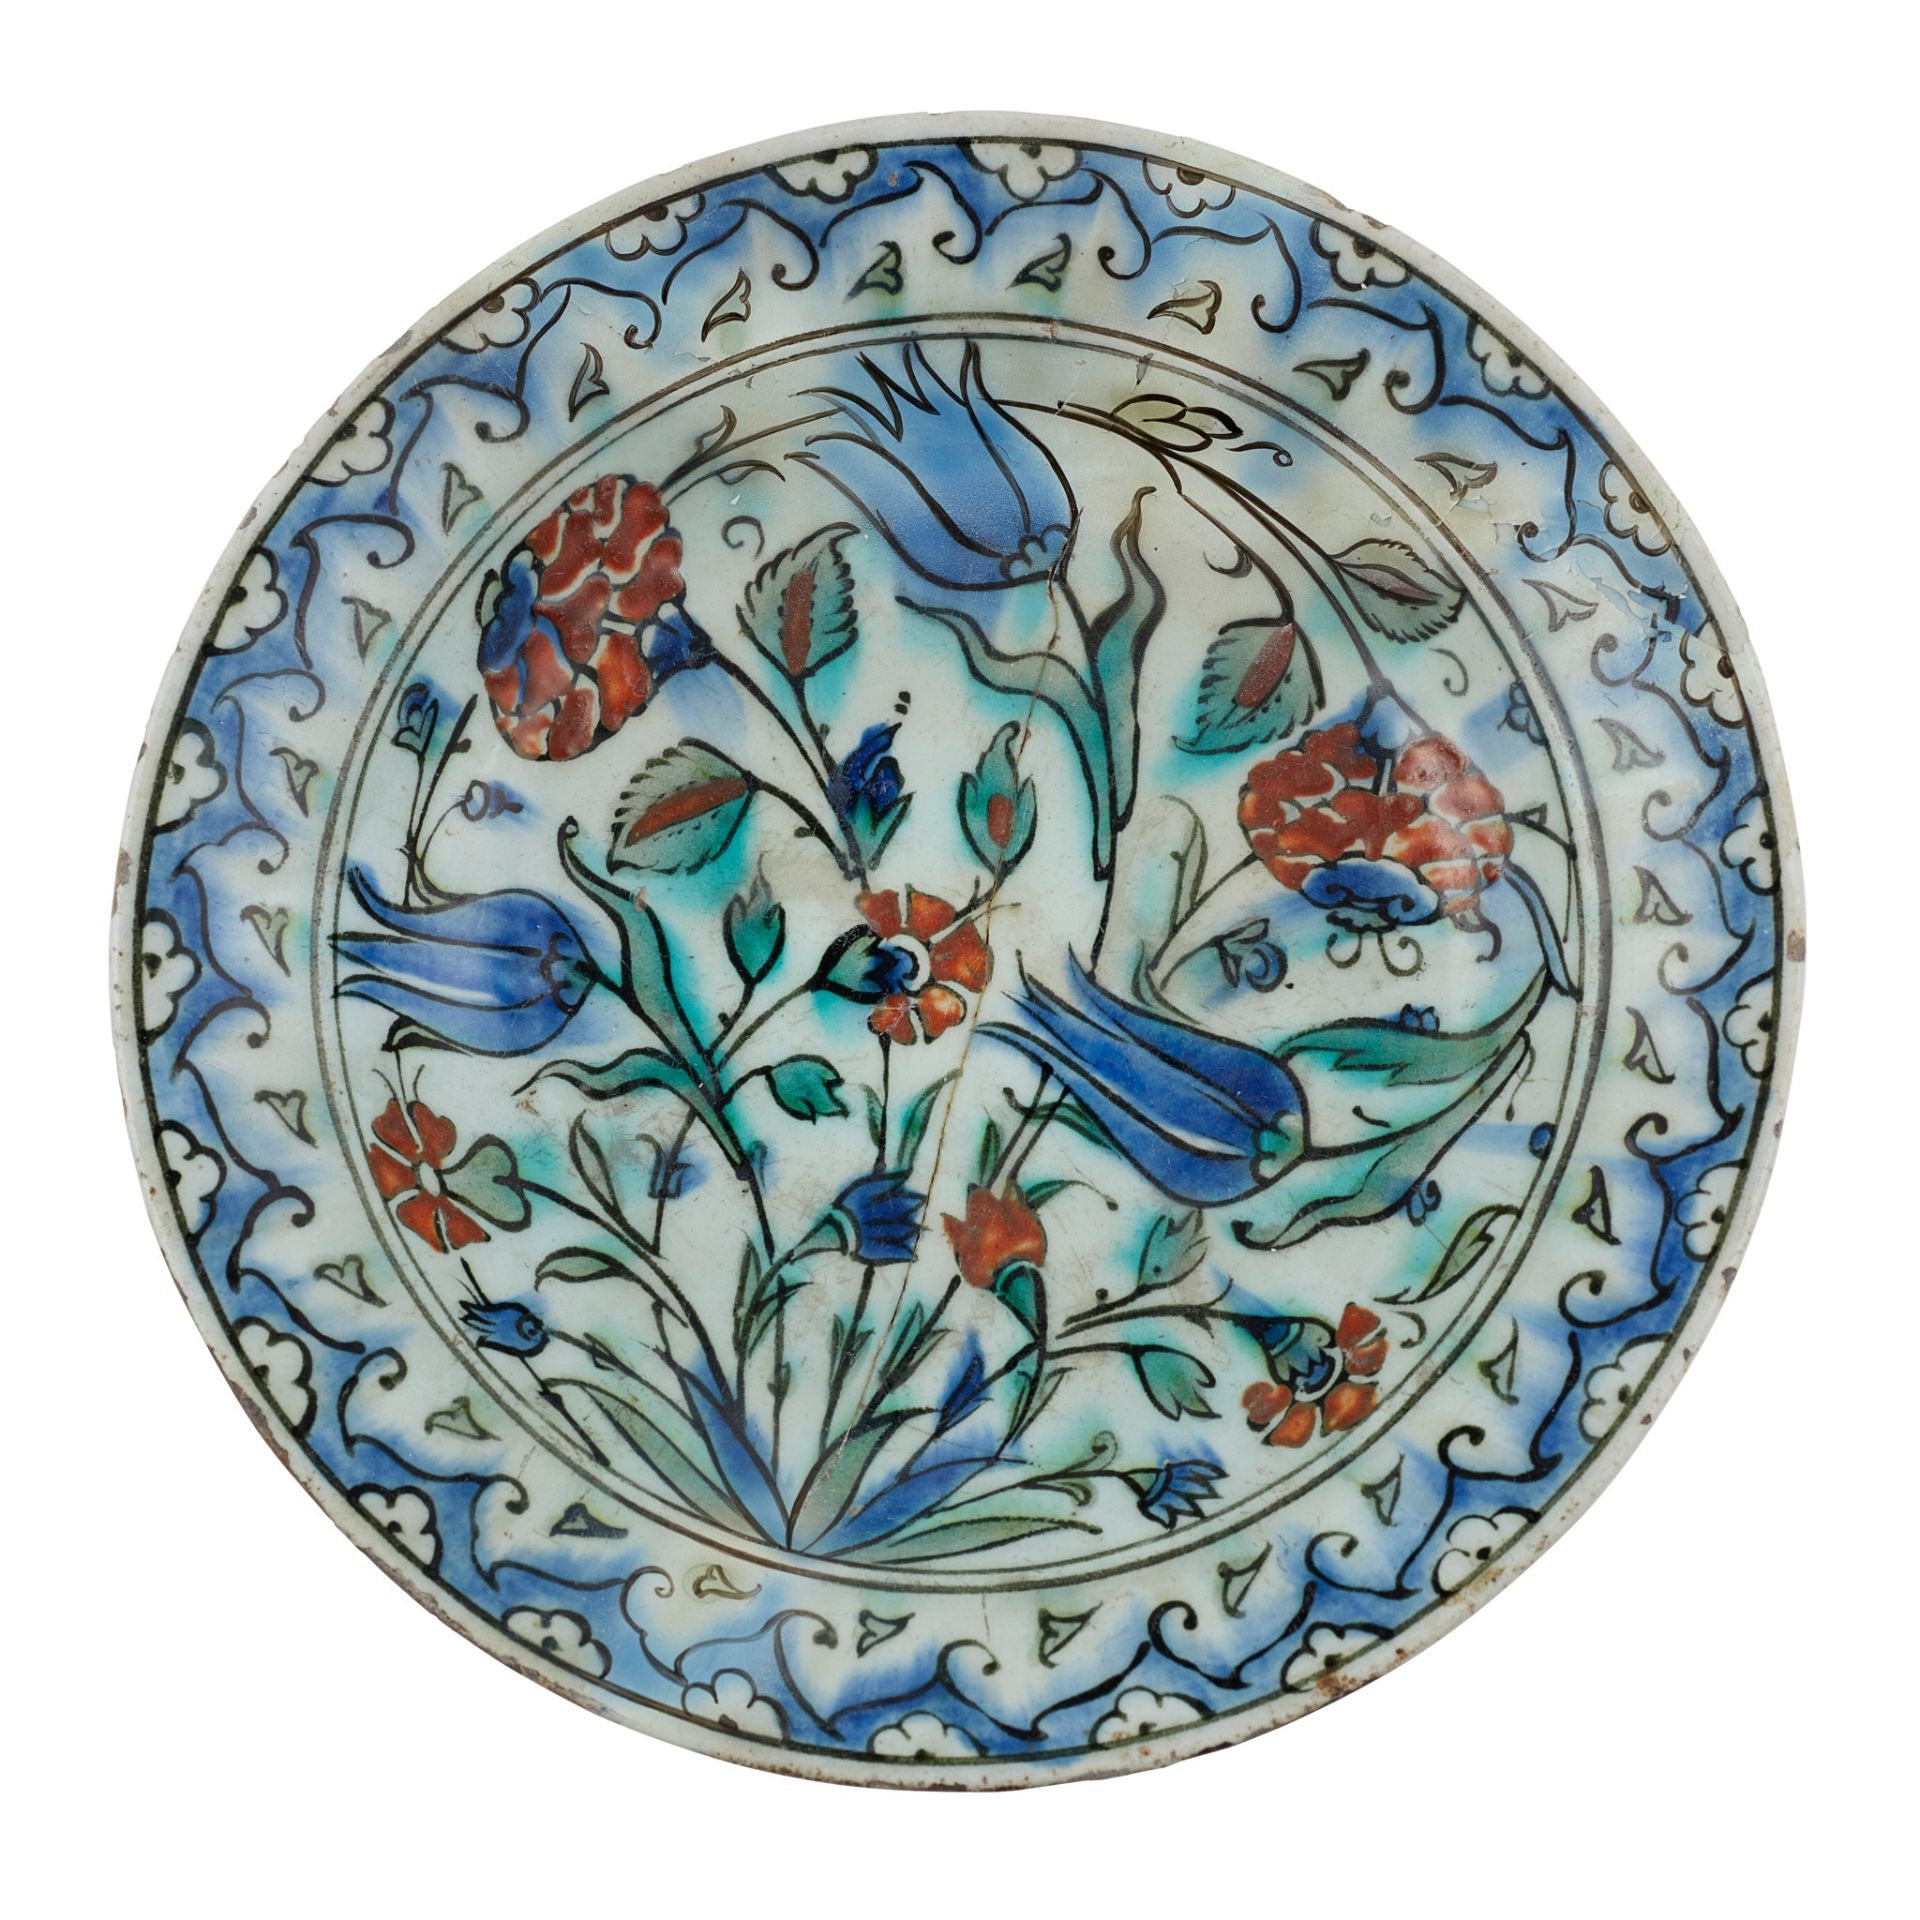 AN IZNIK POTTERY DISH WITH TULIPS, CARNATIONS AND ROSES OTTOMAN TURKEY, 17TH CENTURY